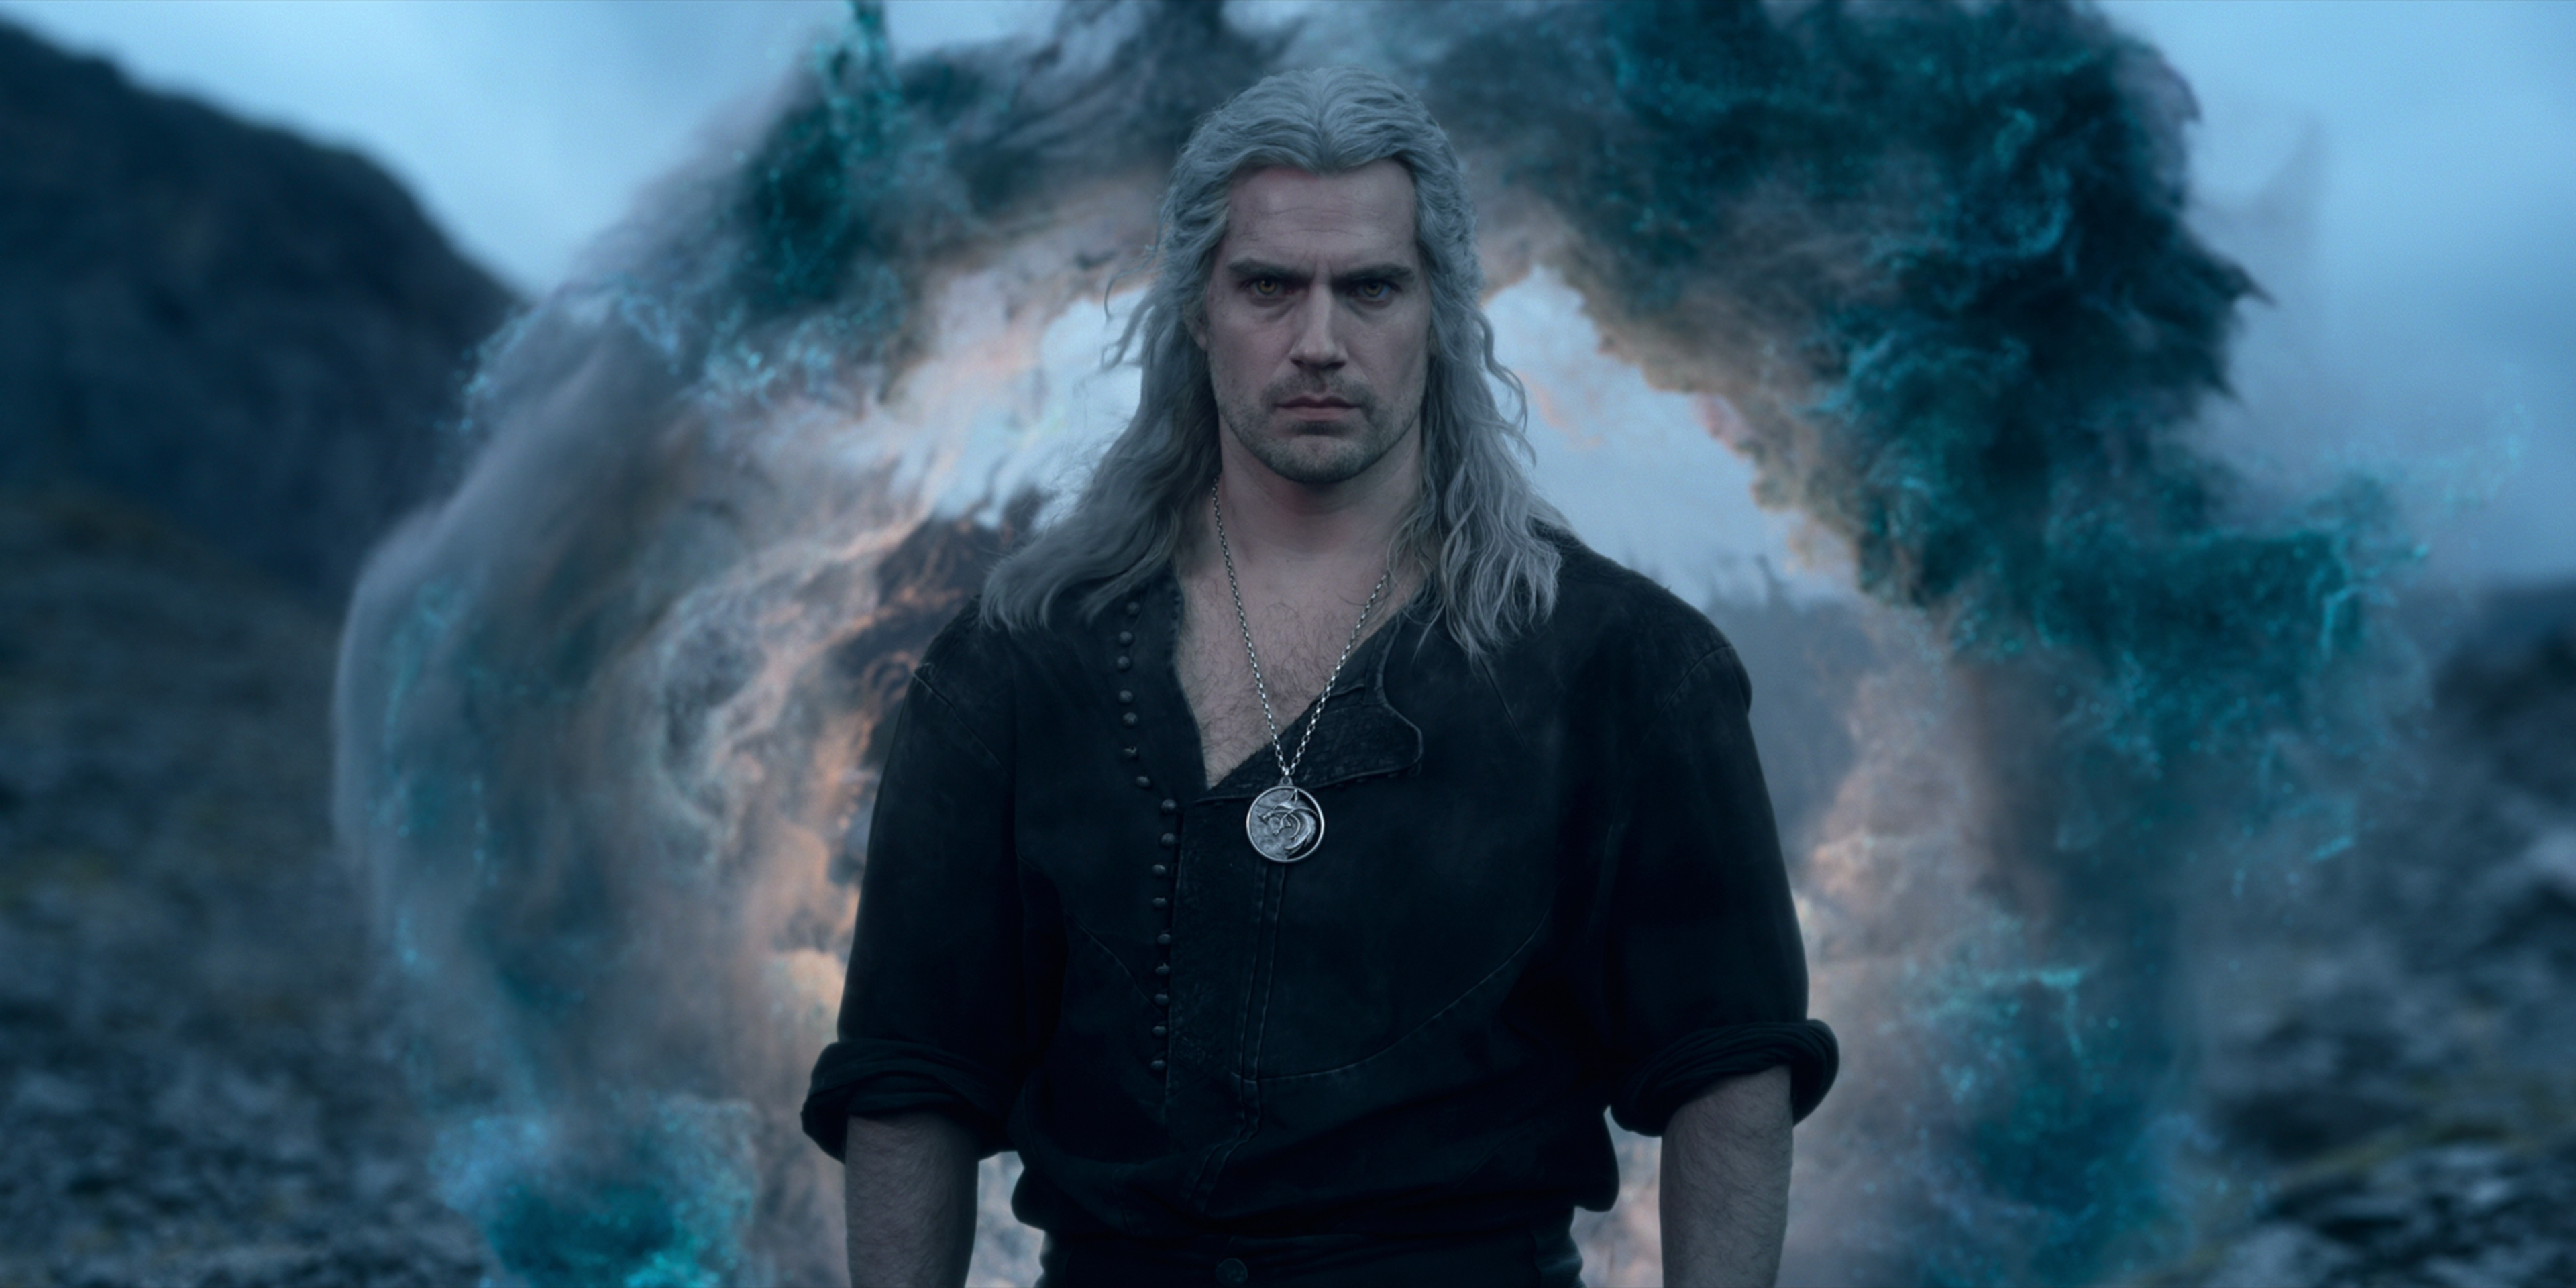 Geralt walks out of a portal looking very stoic in a scene from The Witcher season 3